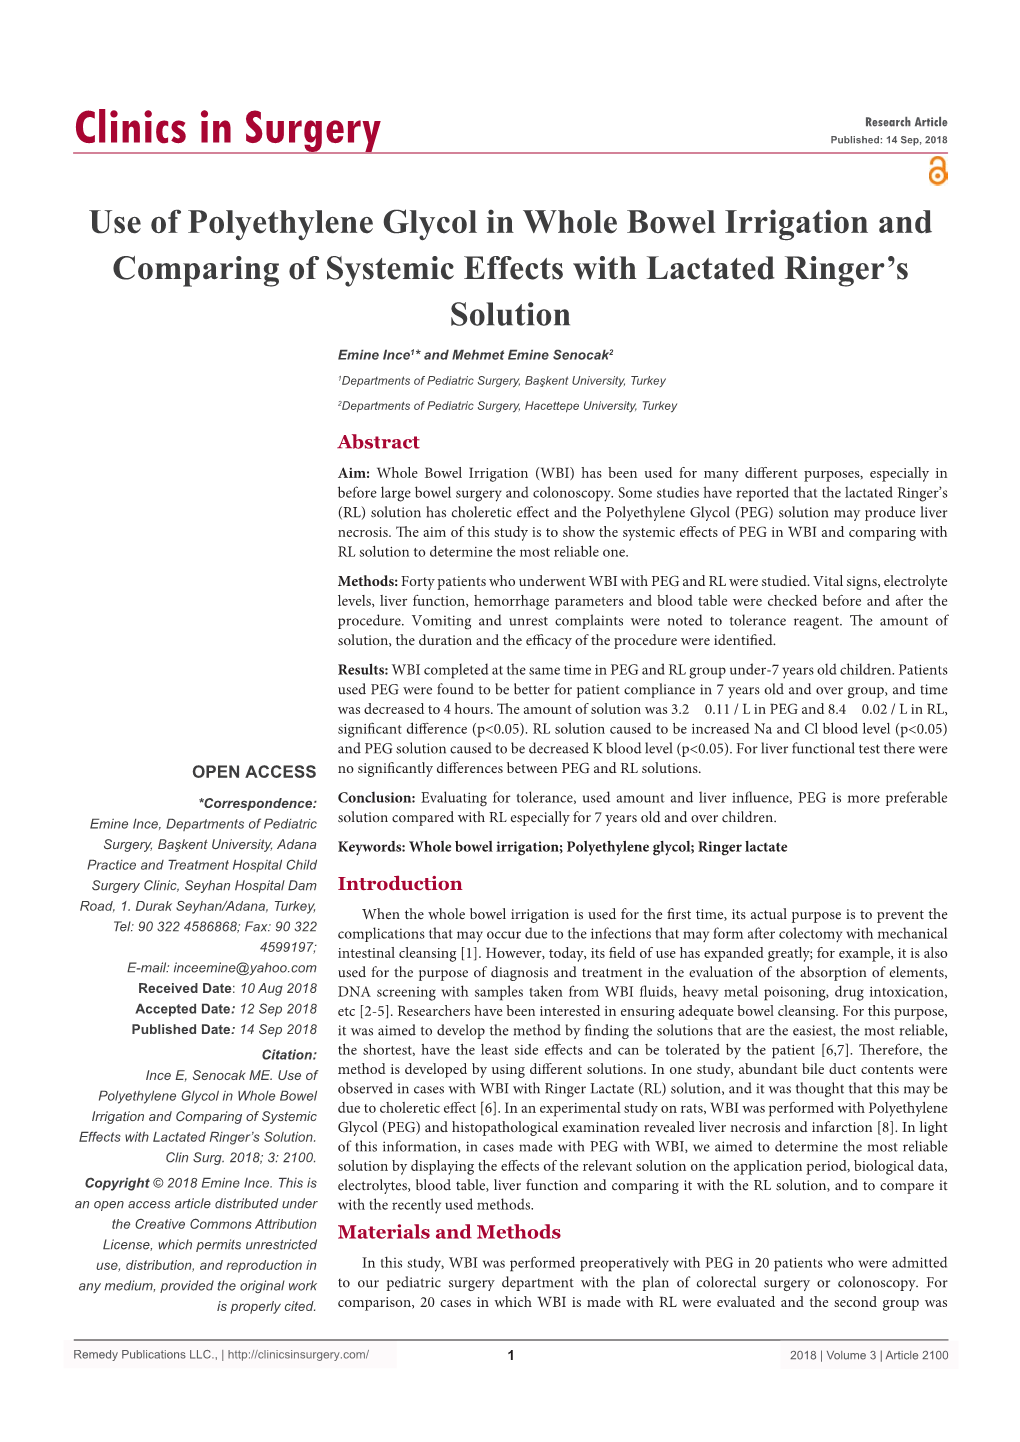 Use of Polyethylene Glycol in Whole Bowel Irrigation and Comparing of Systemic Effects with Lactated Ringer’S Solution